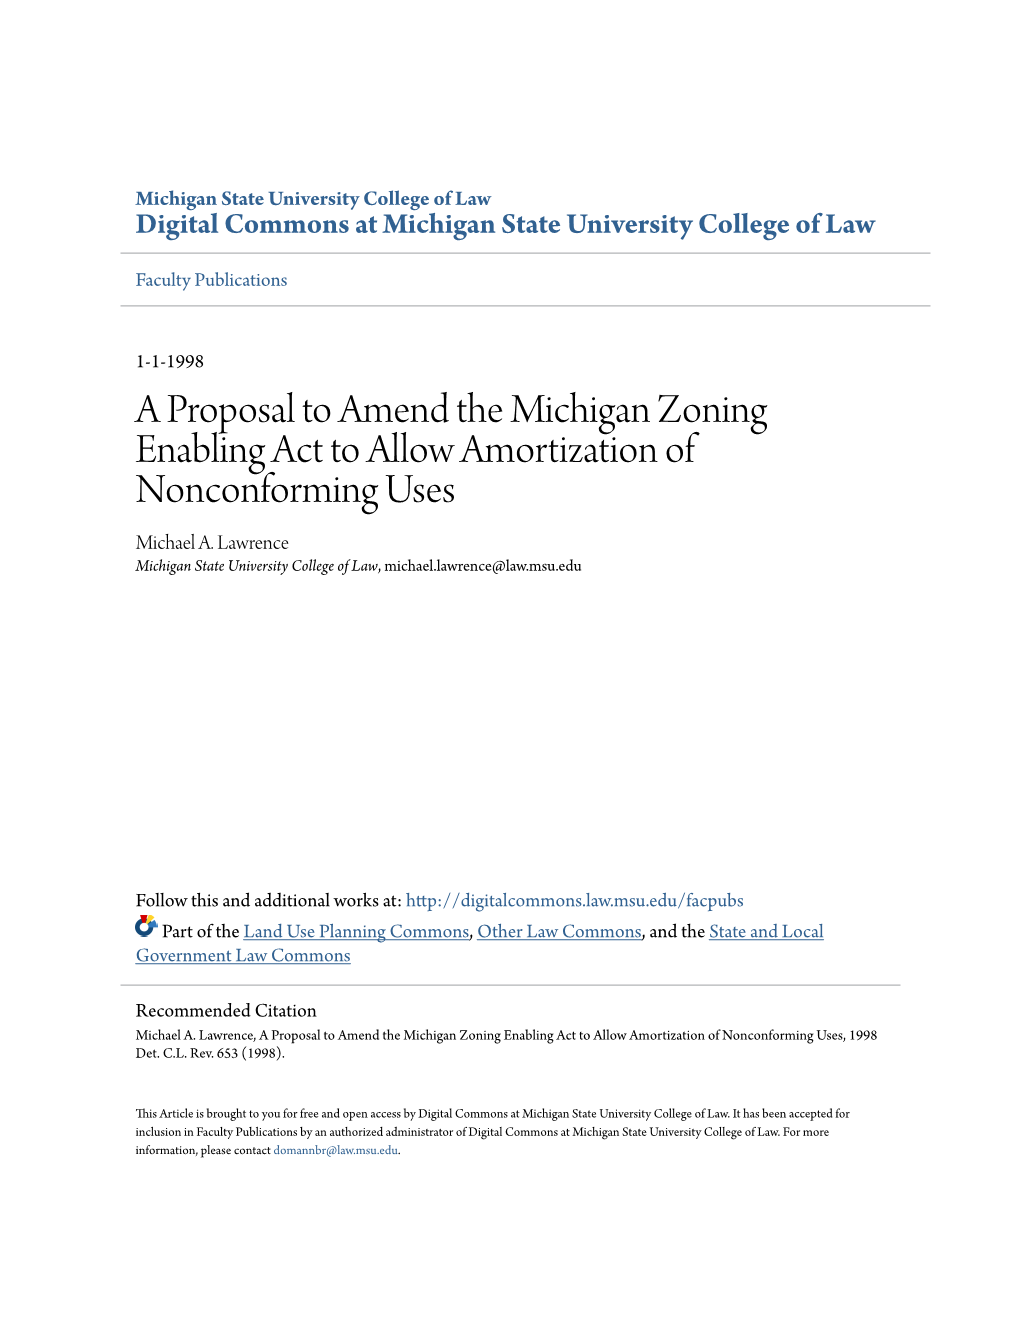 A Proposal to Amend the Michigan Zoning Enabling Act to Allow Amortization of Nonconforming Uses Michael A